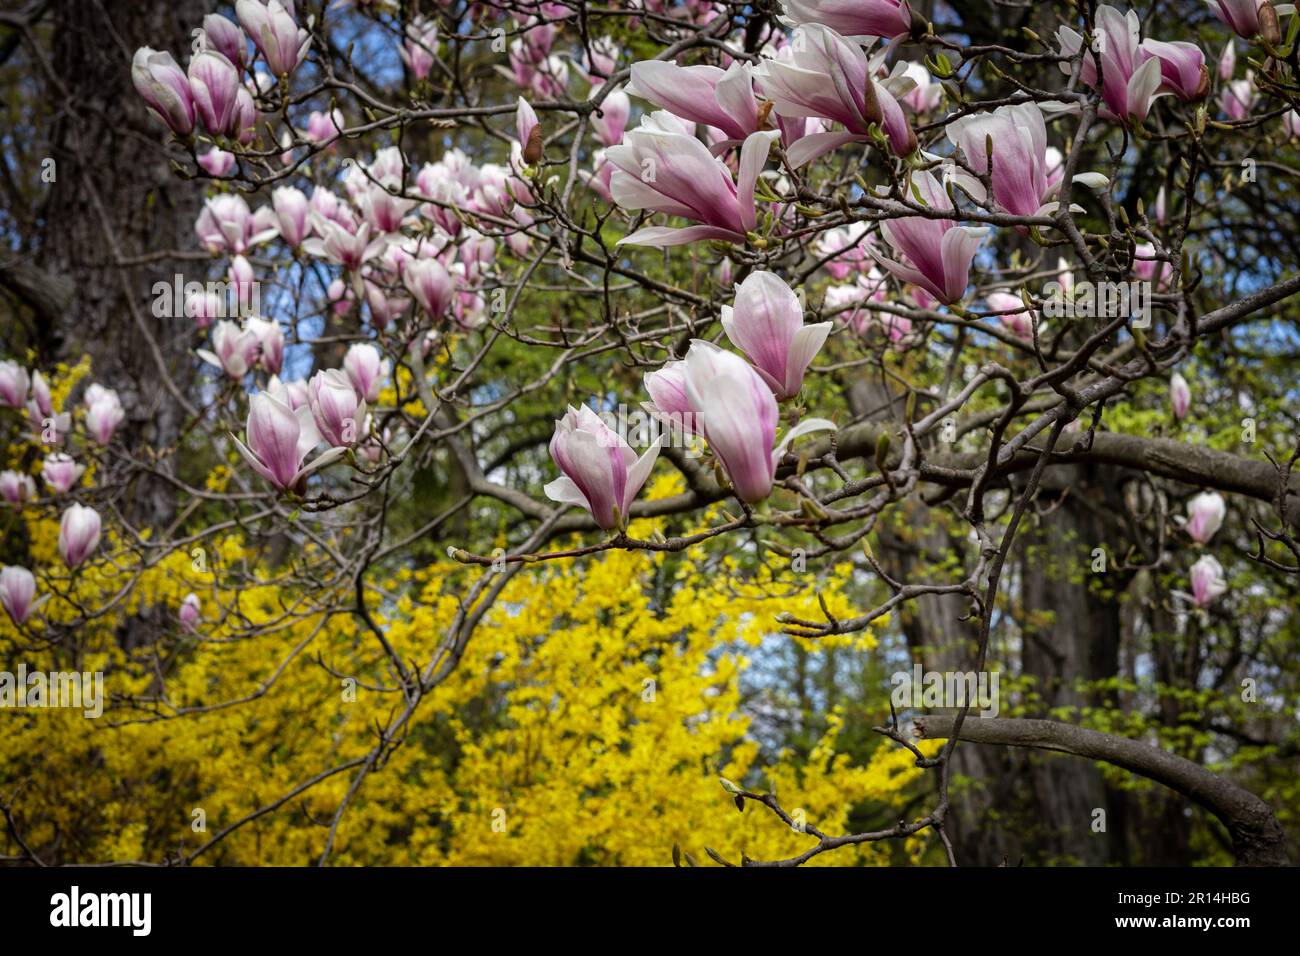 Blossoming pink magnolia tree and a yellow forsythia bush in the park in springtime. Stock Photo